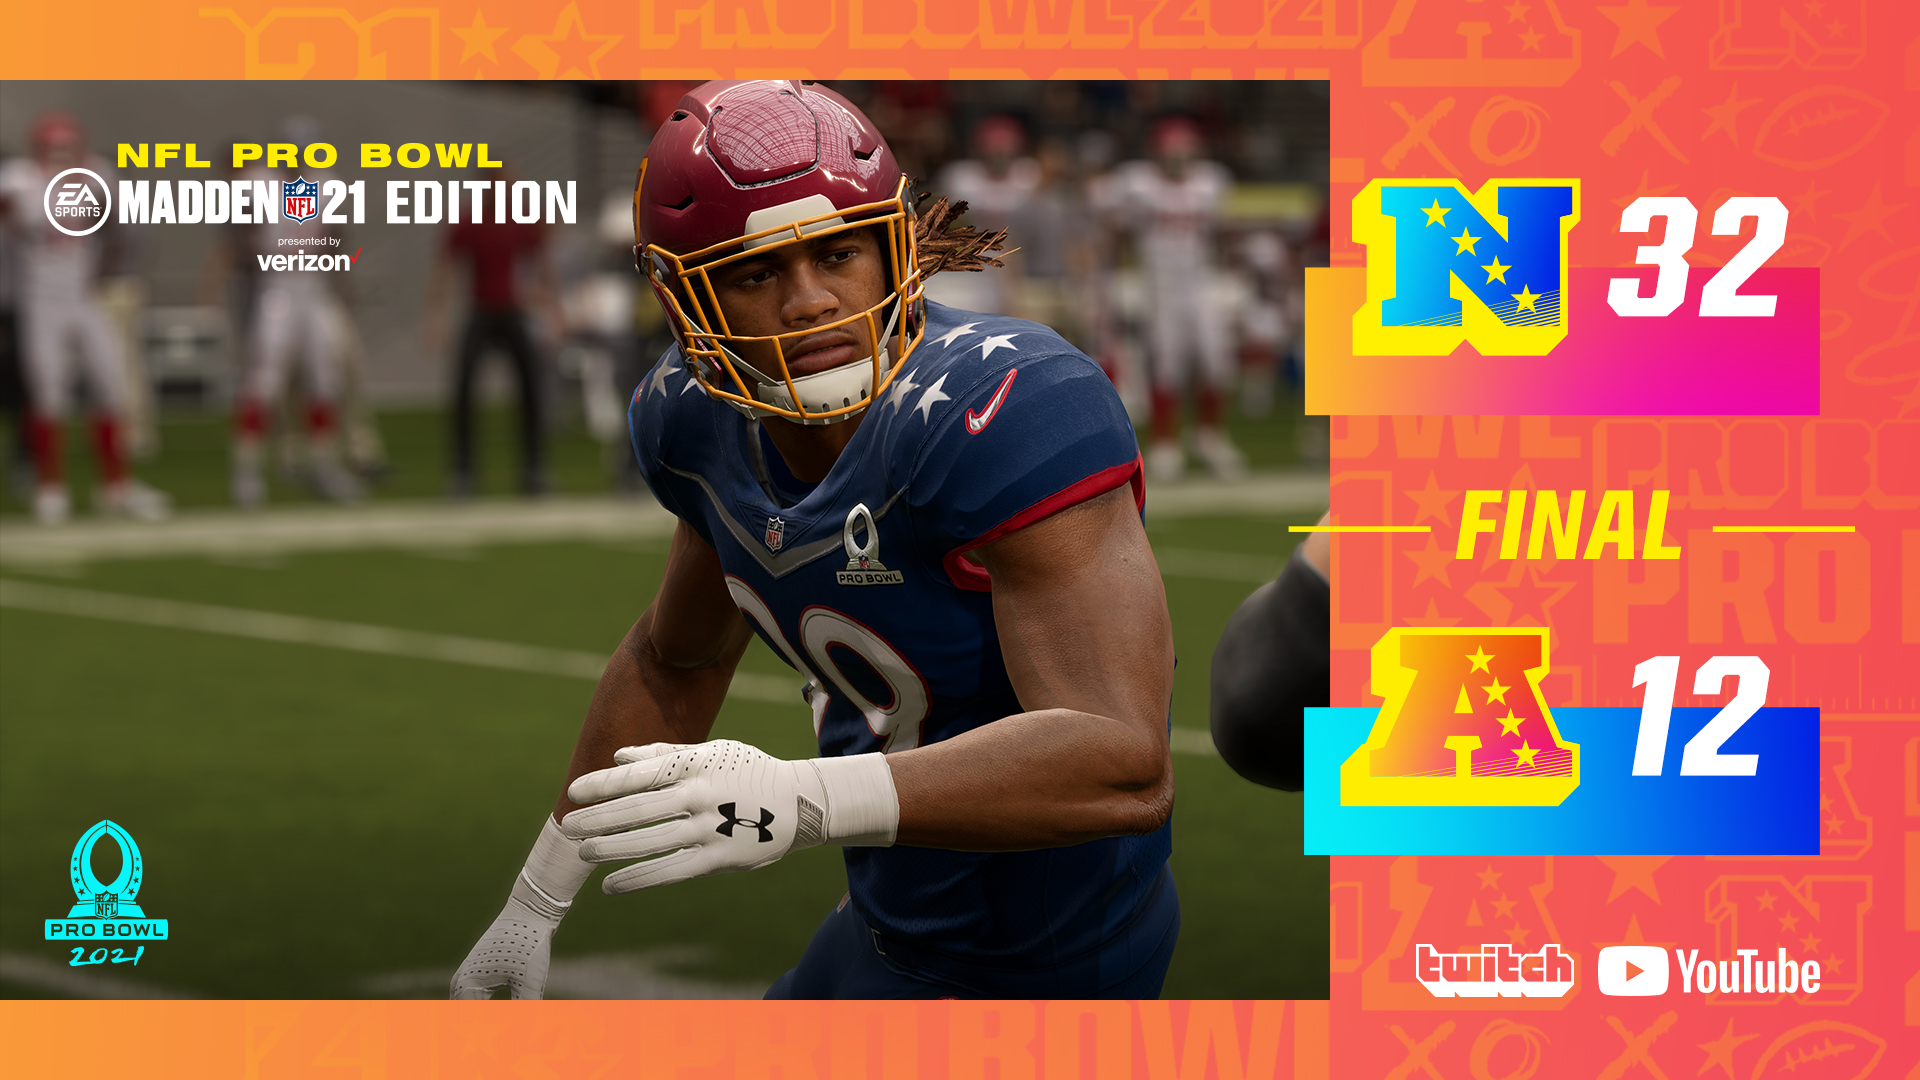 Madden NFL 24 on X: Final score from the #ProBowl: Madden NFL 21 Edition  